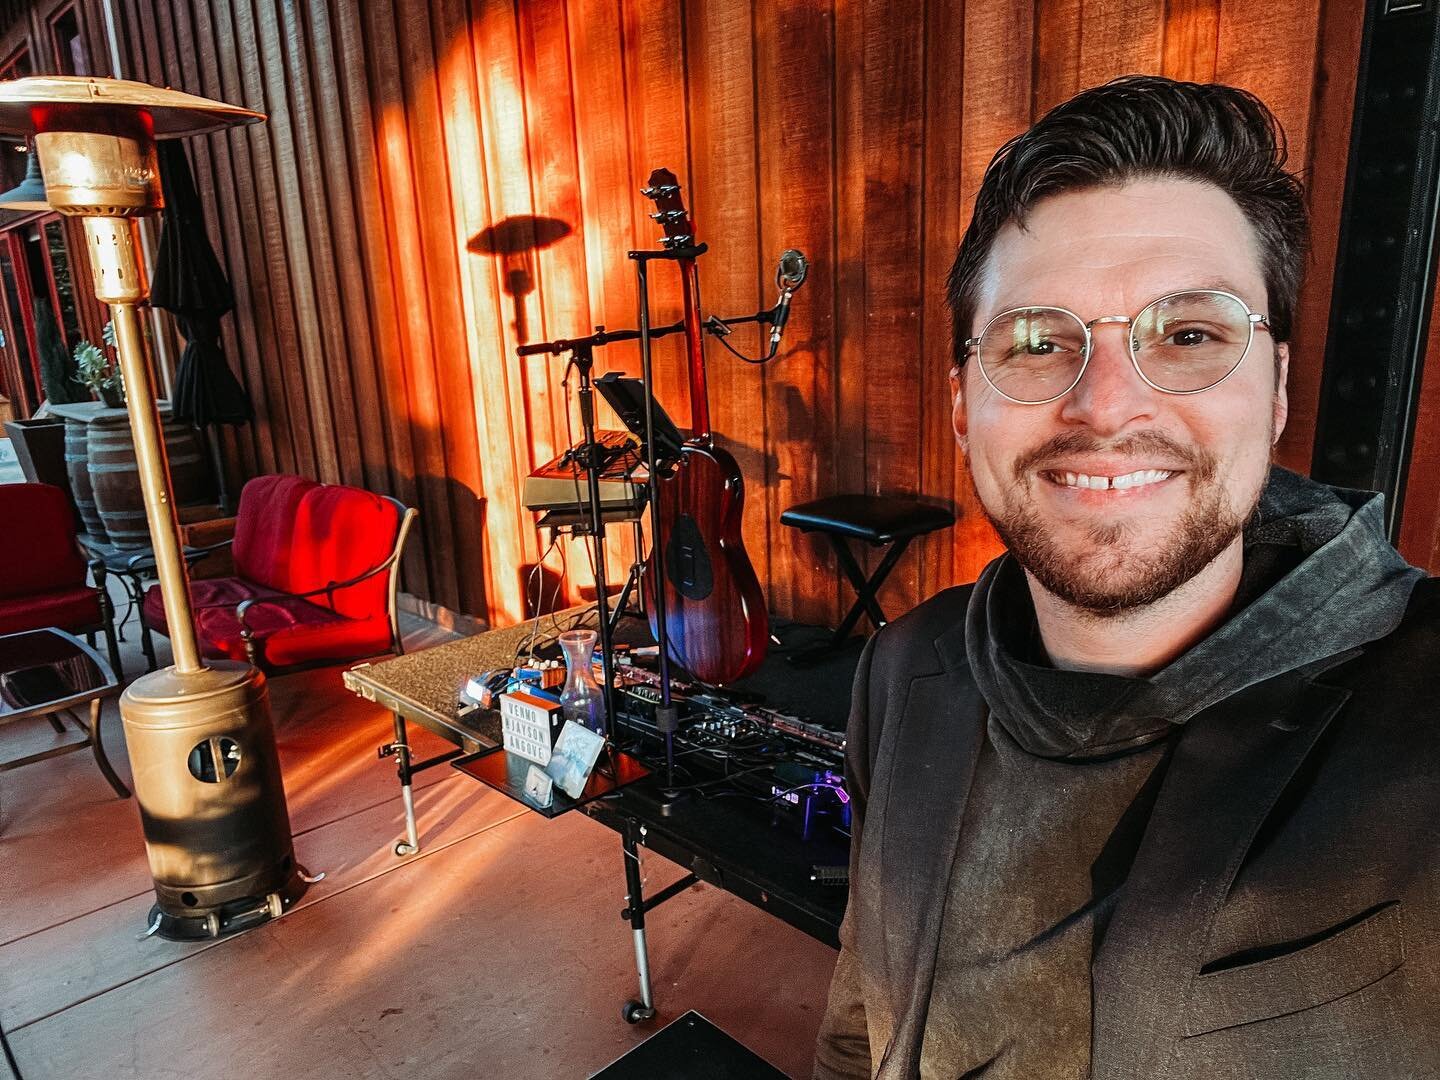 I guess you could say I&rsquo;m feeling elevated&hellip;

But seriously excited to be back at Oak Farm! I love this place!

I play 5pm to 8pm.

Be good humans!

#begoodhumans #oakfarmvineyards #sacramento #sacramentomusic #theworkingmusician #working